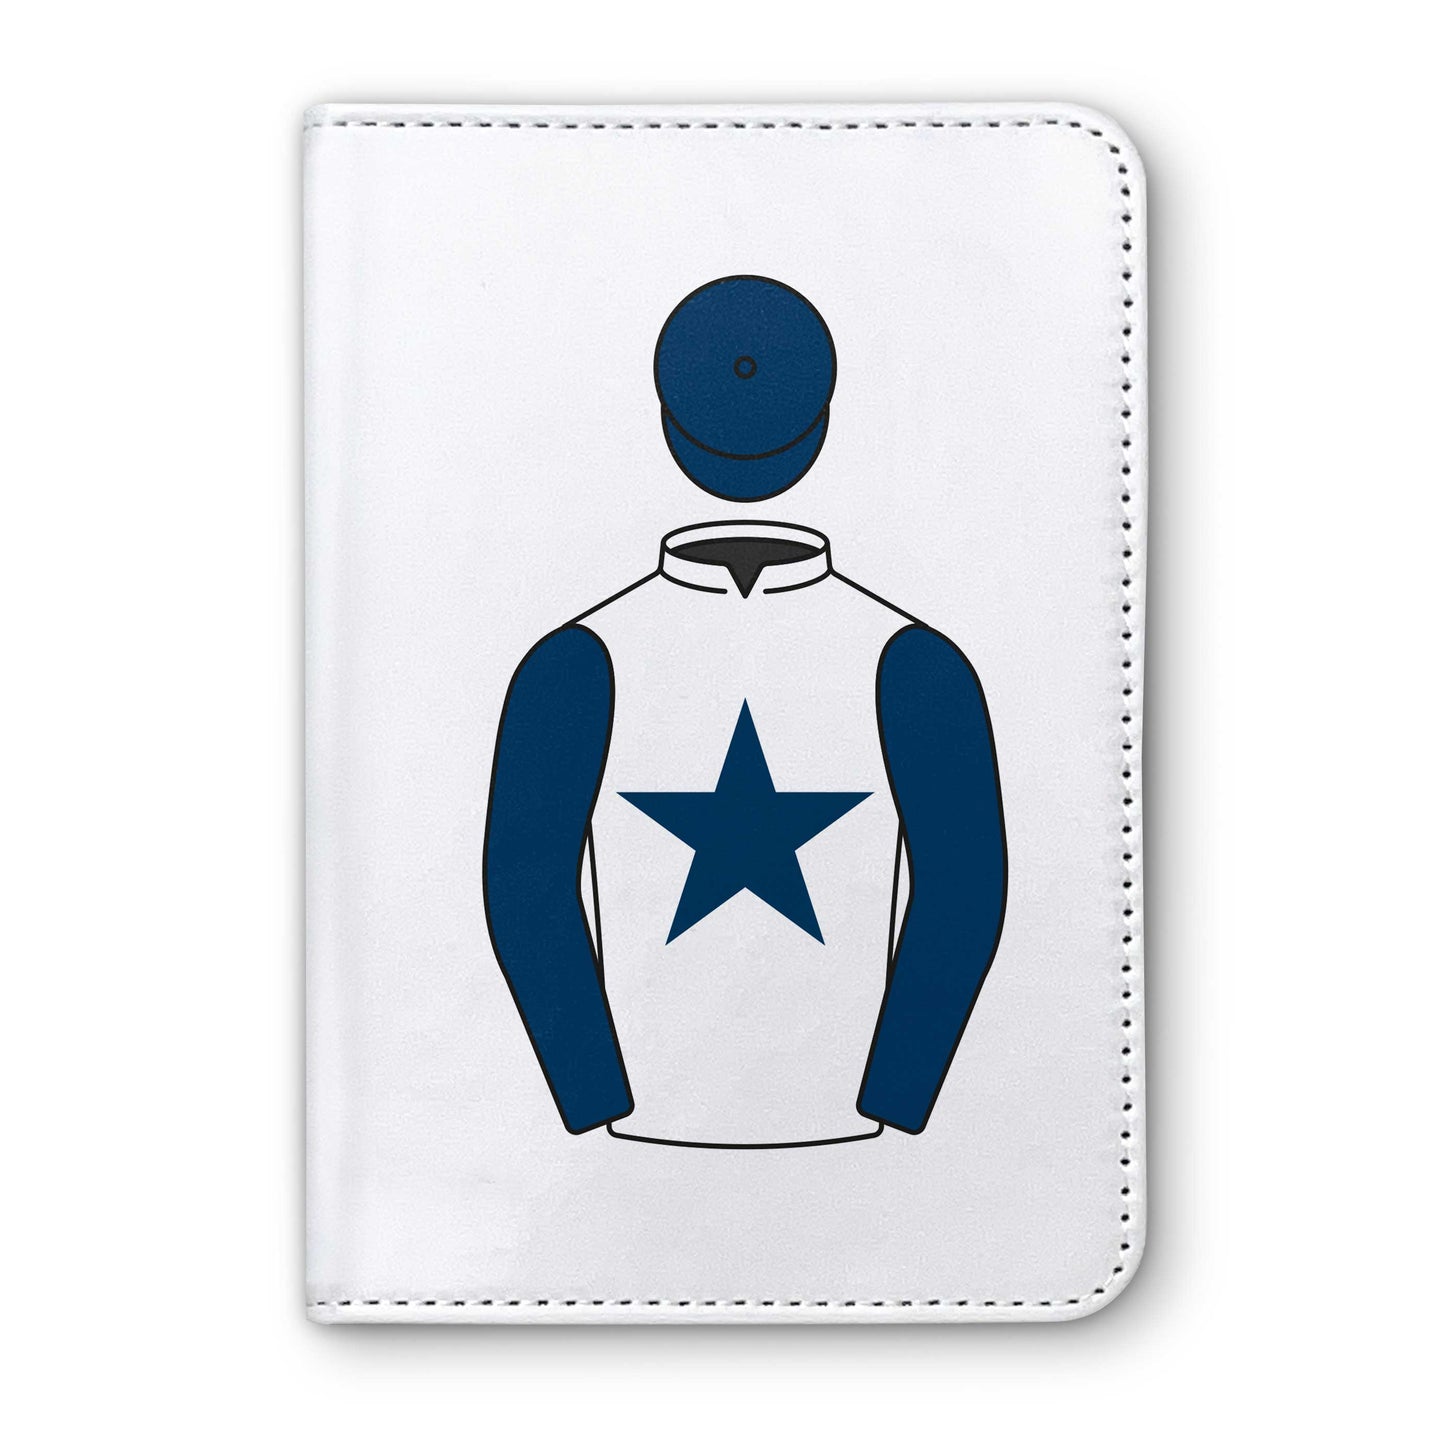 J French, D McDermott, S Nelson, T Syder  Horse Racing Passport Holder - Hacked Up Horse Racing Gifts